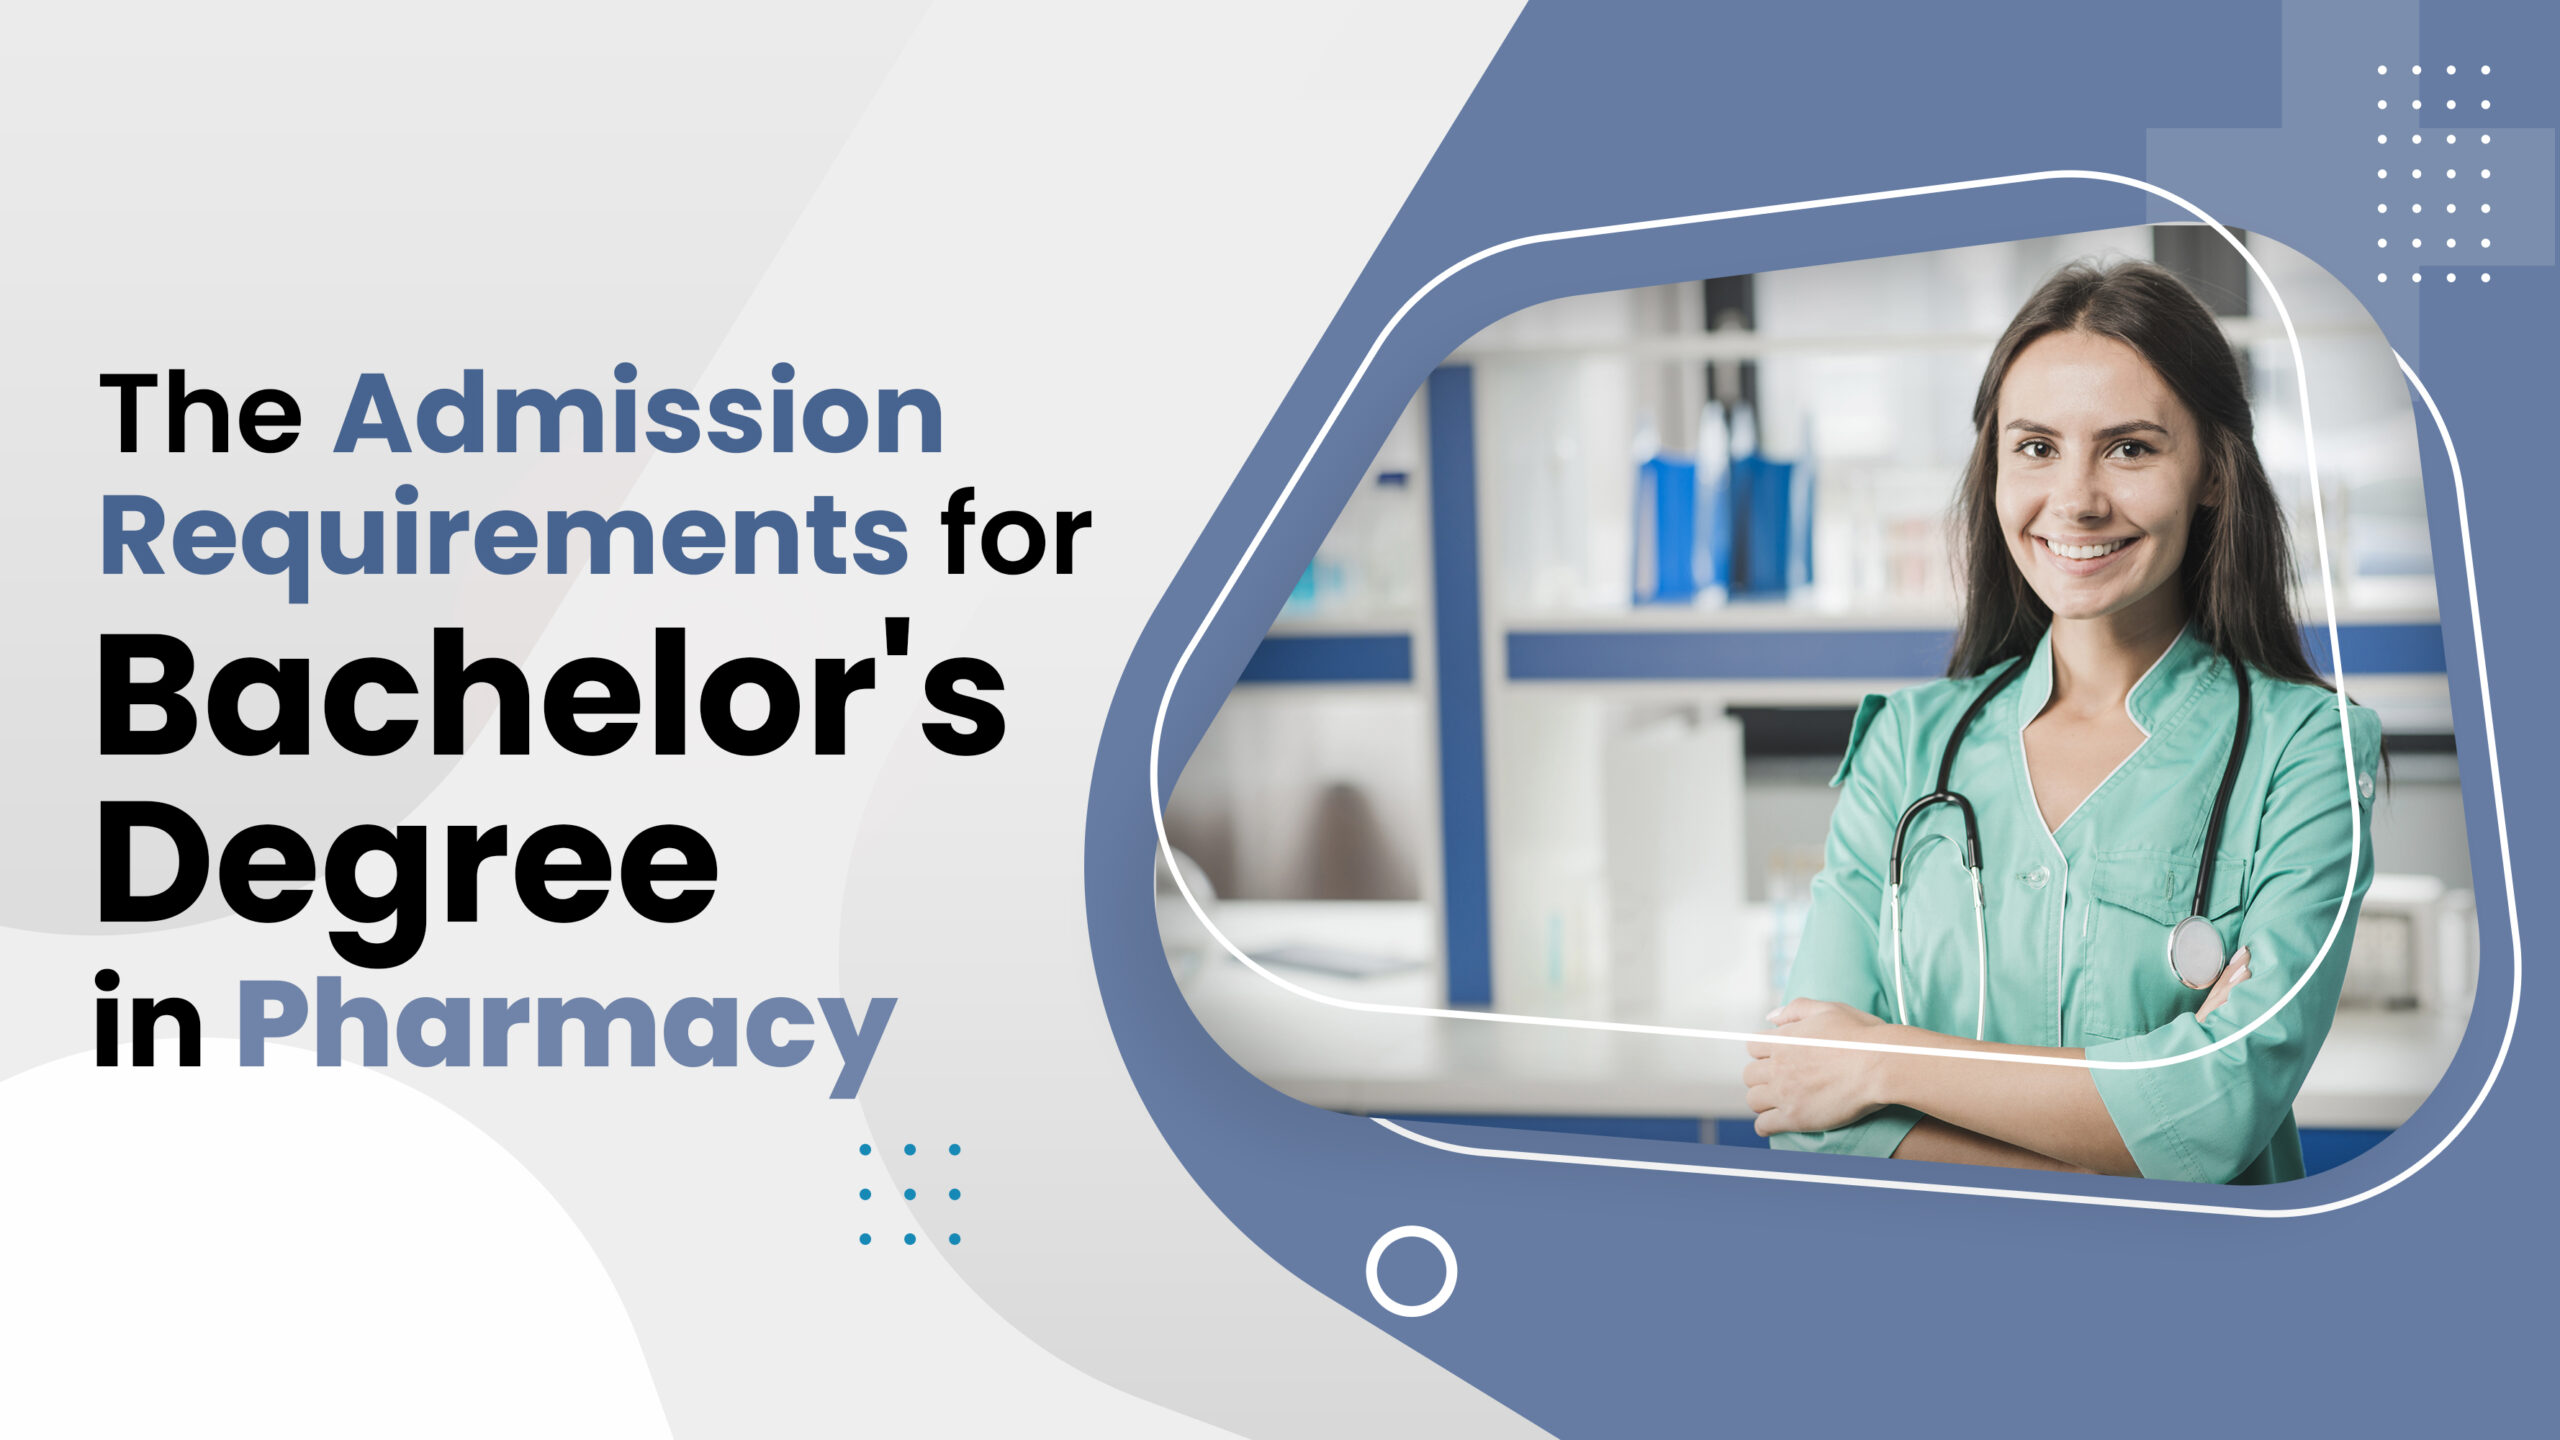 The Admission Requirements for a Bachelor's Degree in Pharmacy